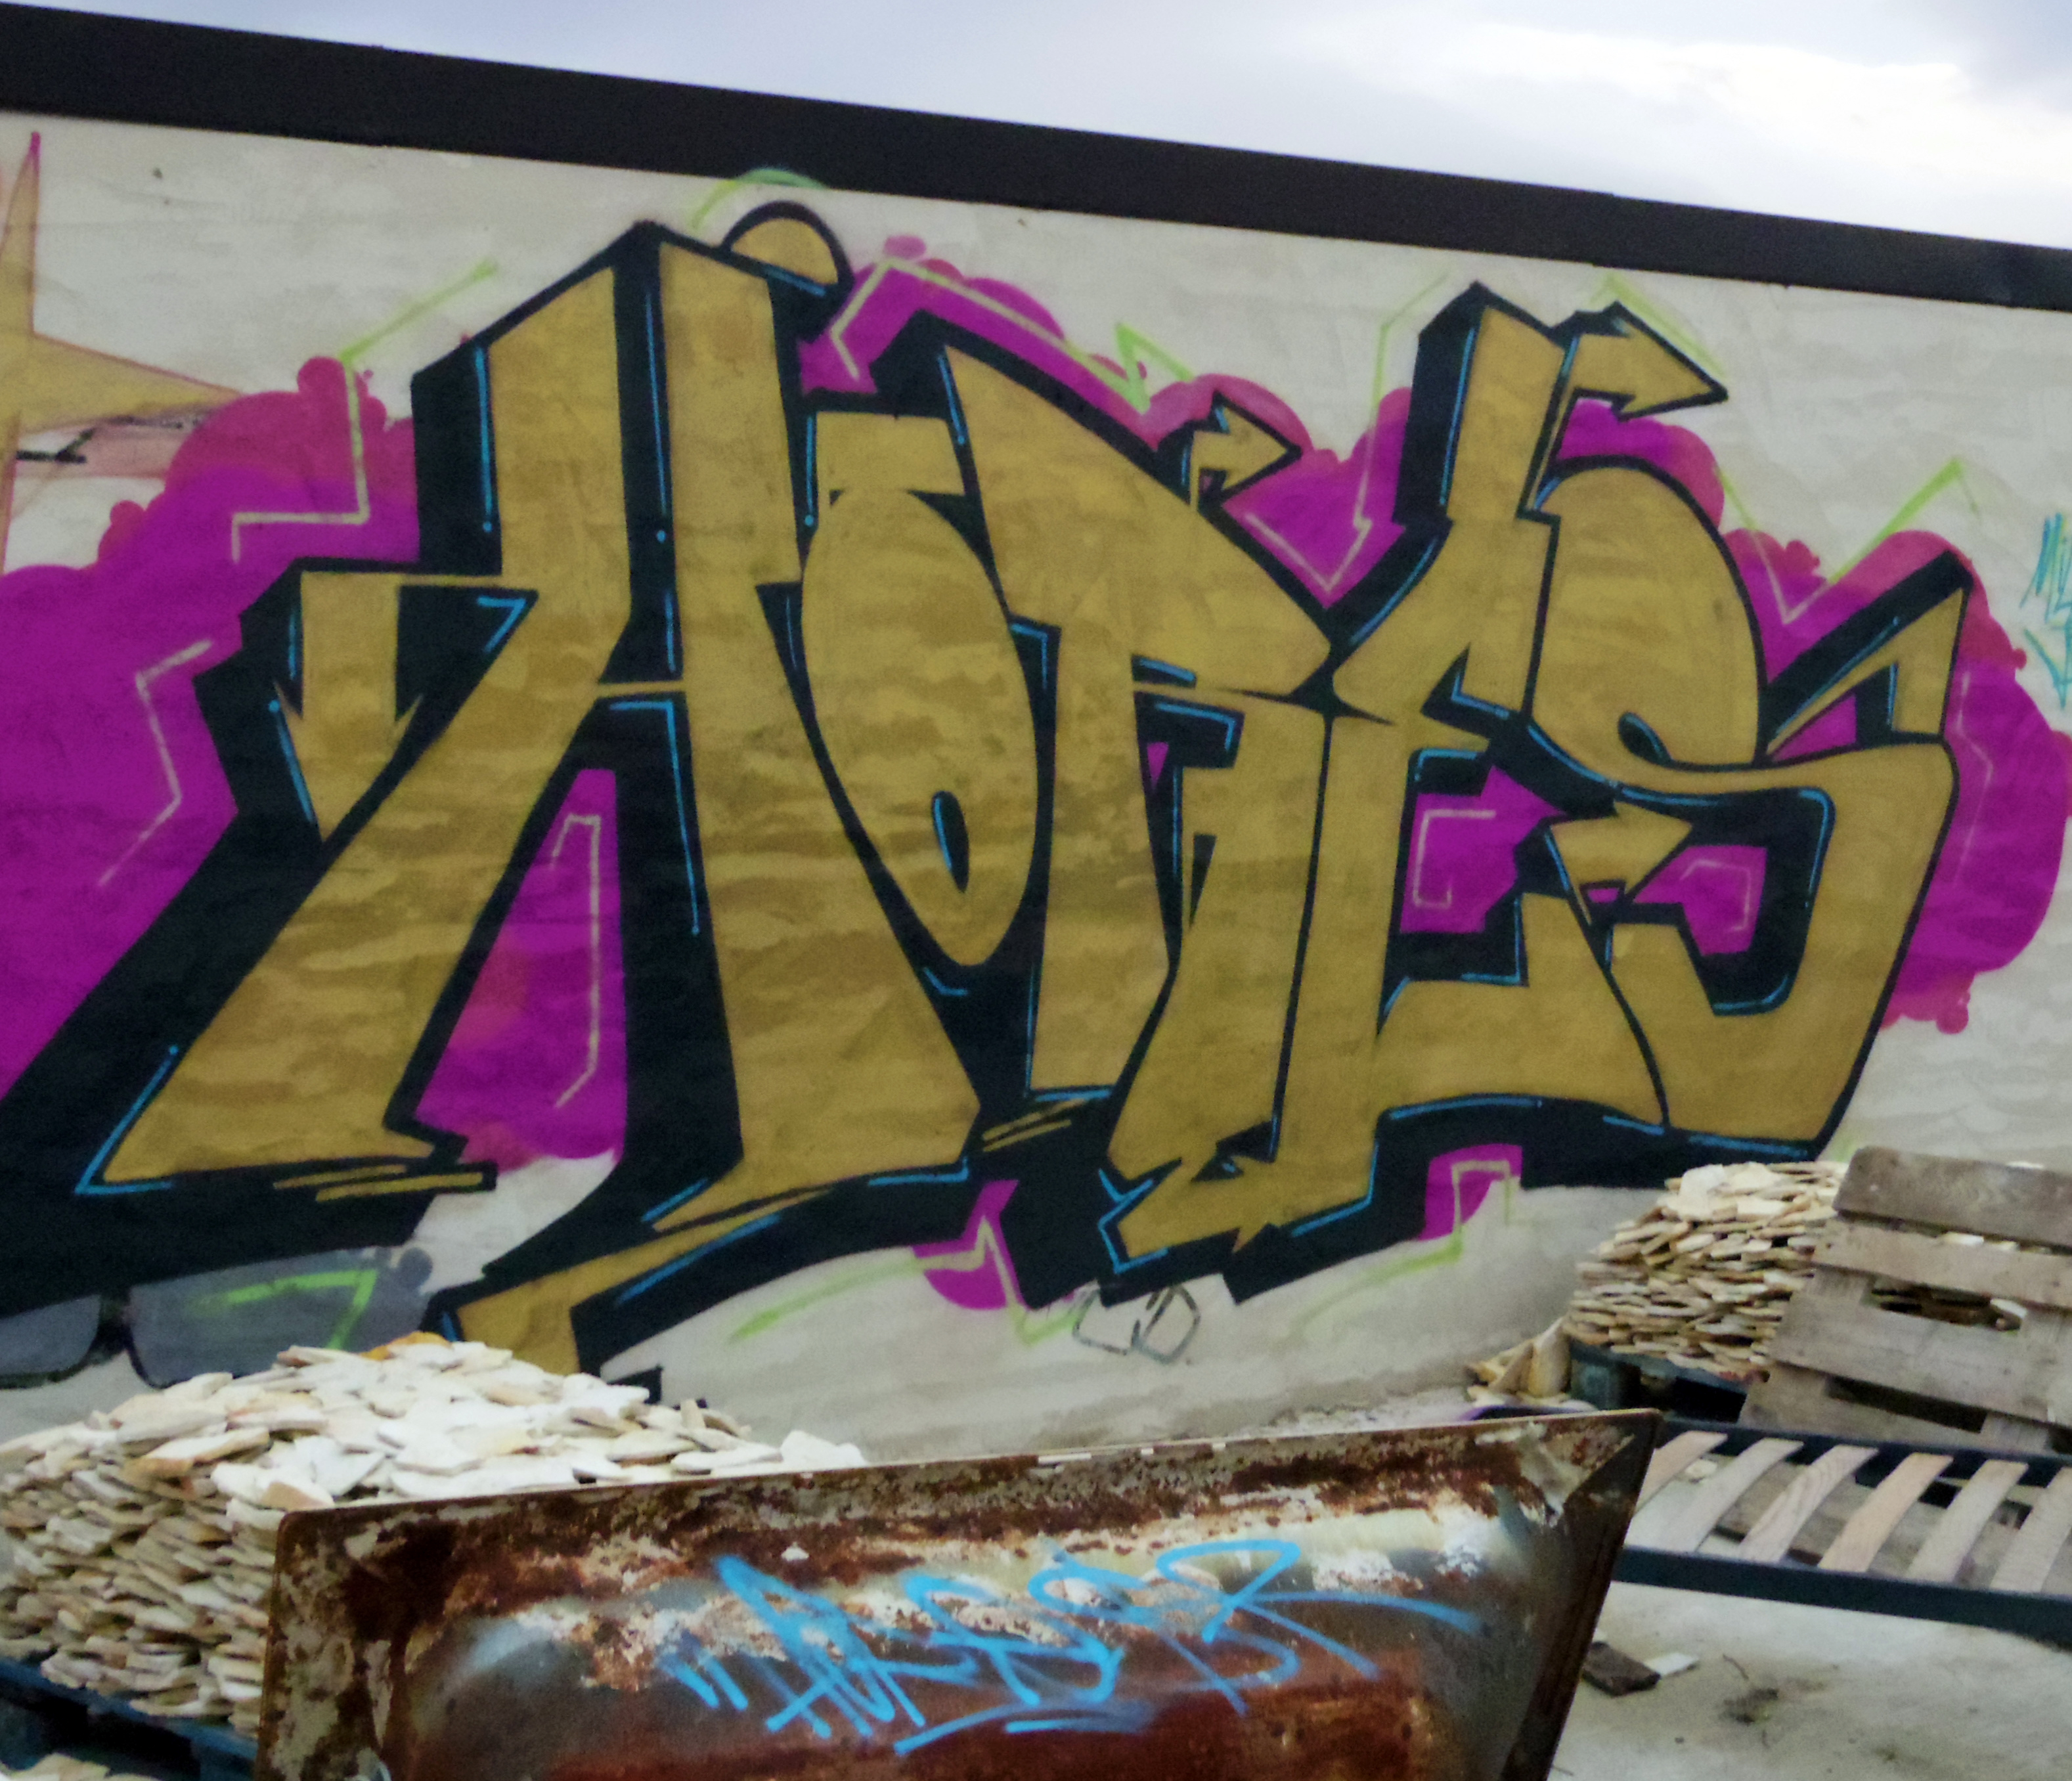 Gold//Wildstyle in the middle of the trash #graffiti | Graffiti ...